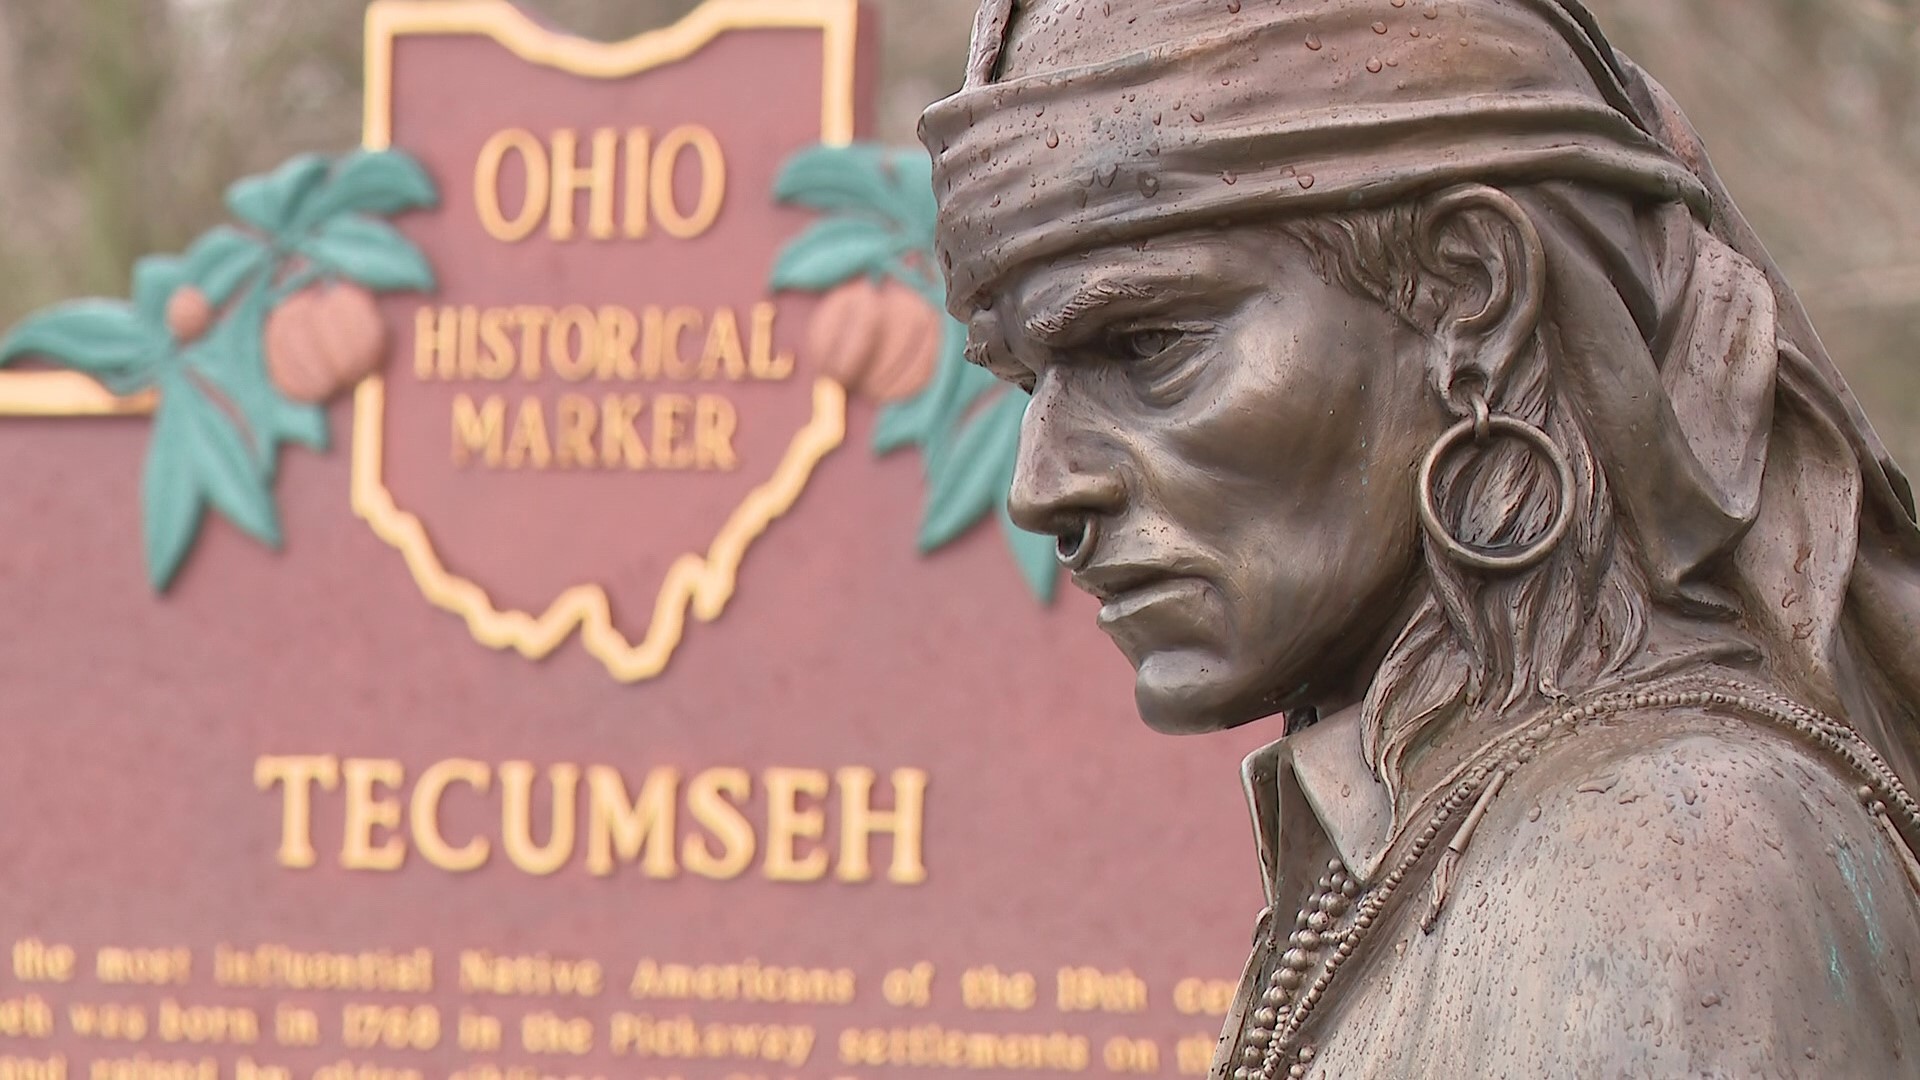 More than two centuries ago, the brother of famous Shawnee Chief Tecumseh arose from obscurity to become one of the most powerful men of his time.